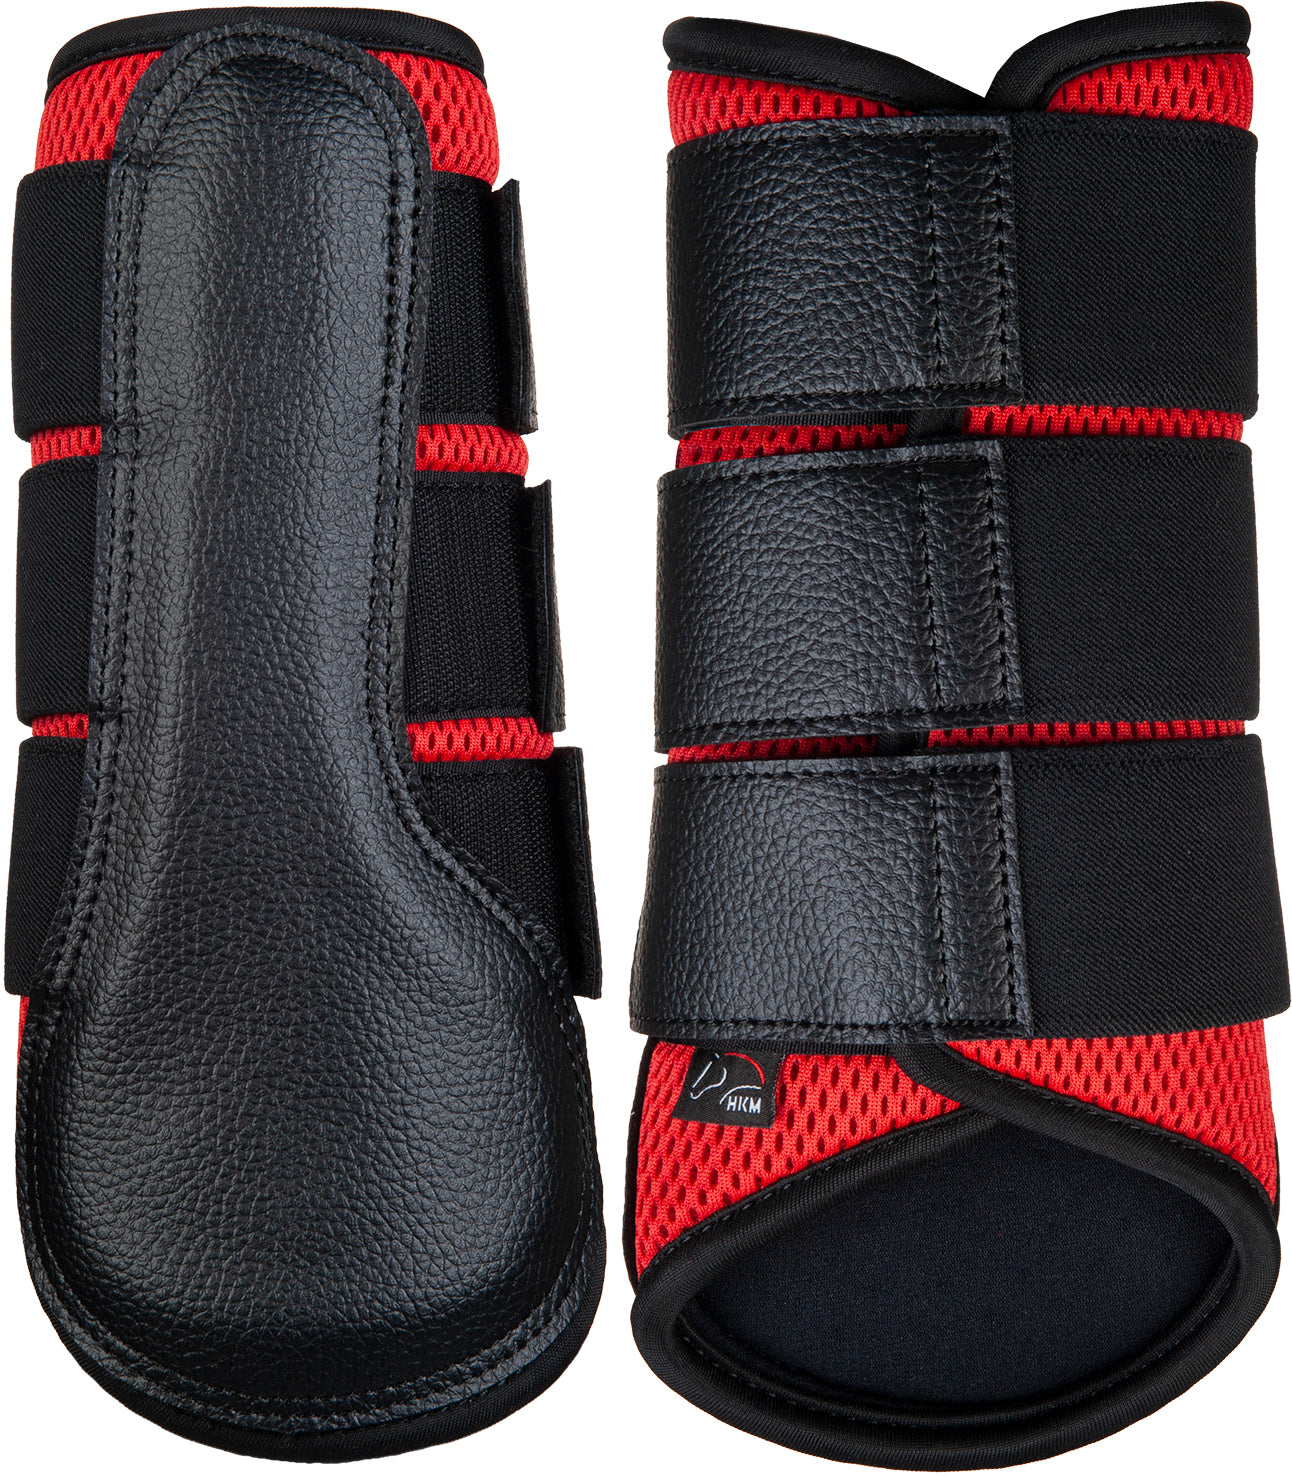 Red Horse Protection Boots